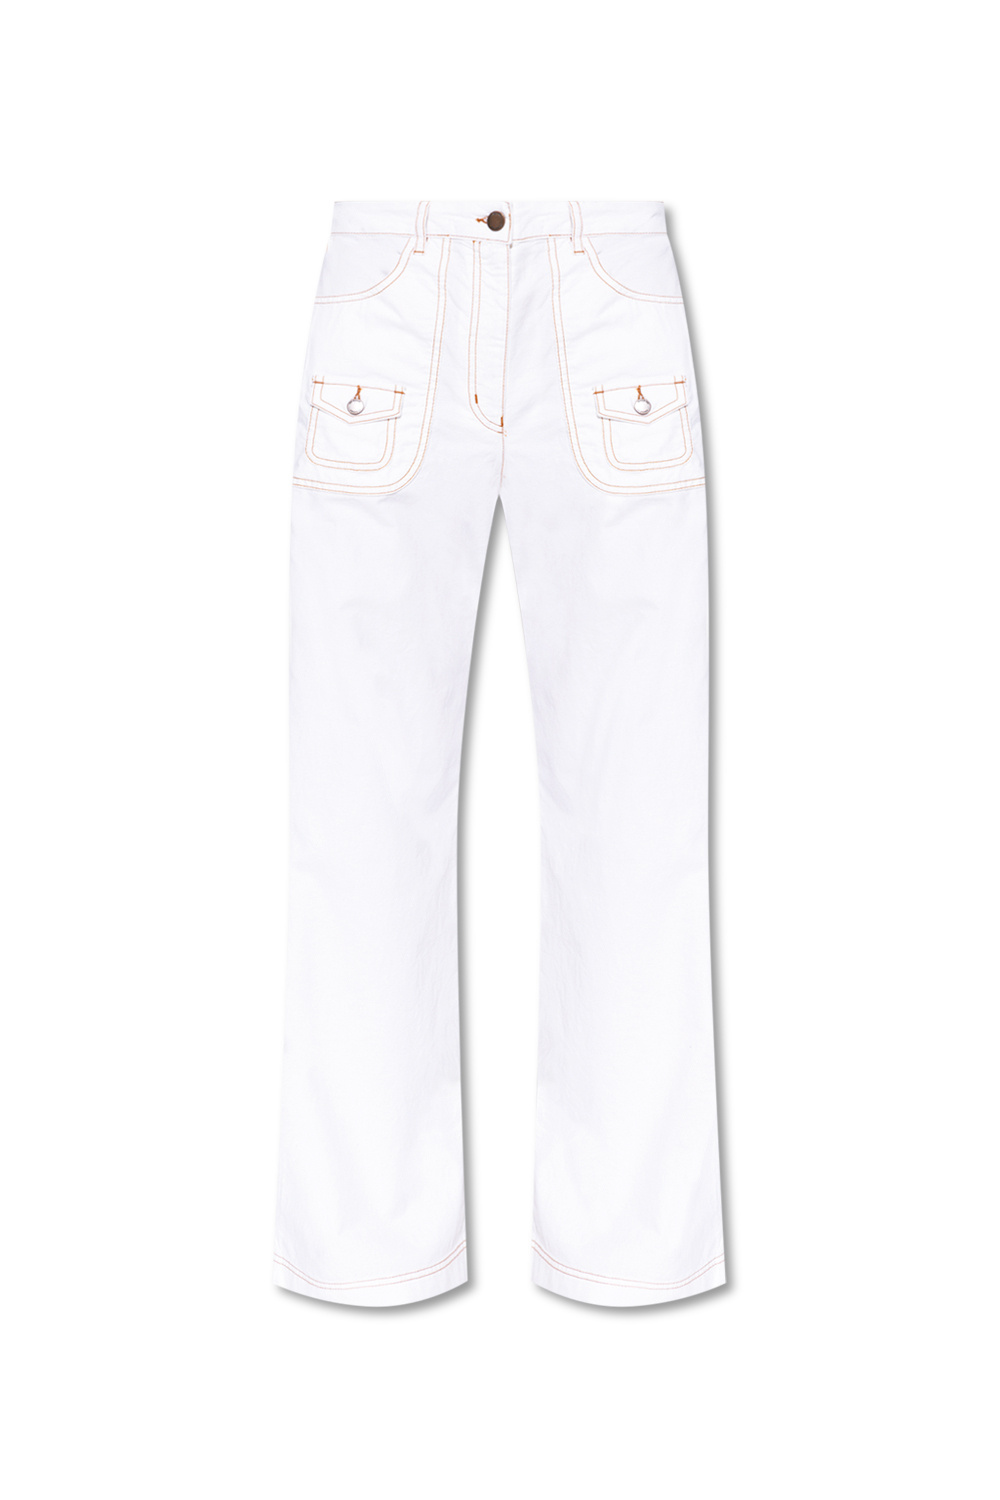 Love Moschino belted trousers with logo